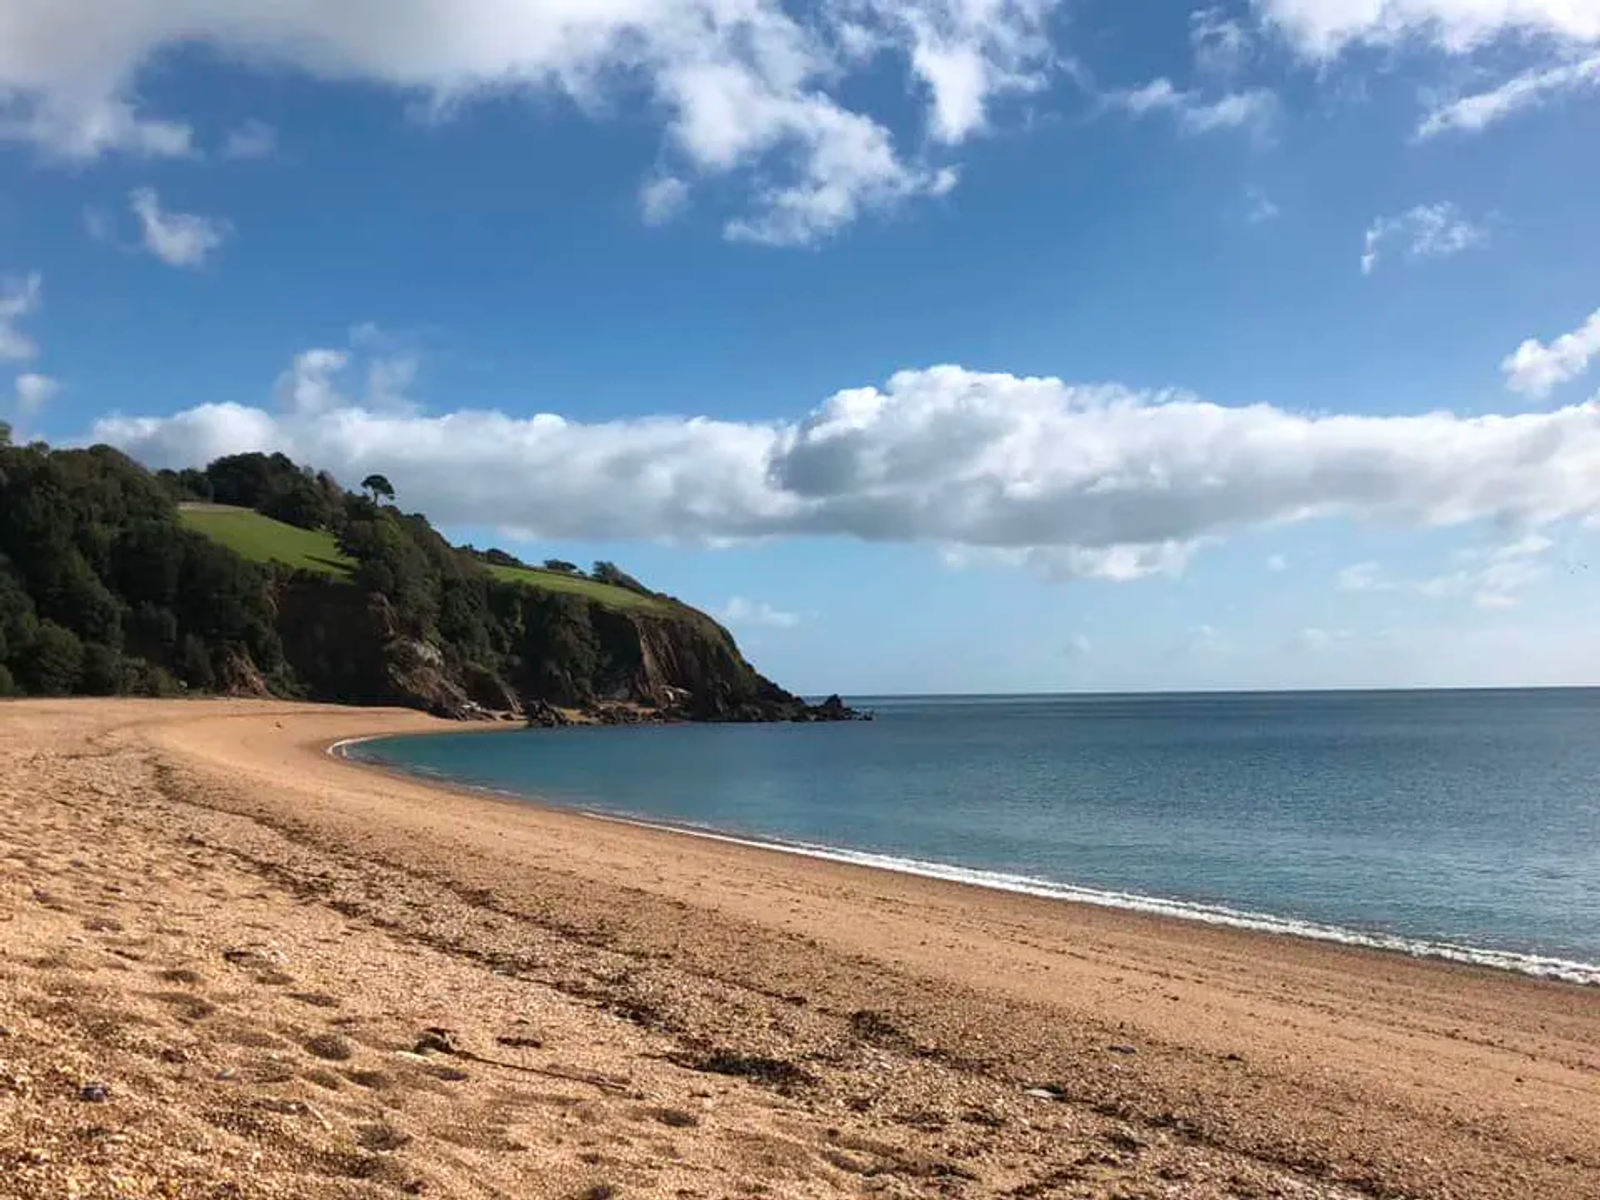 The award-winning Blackpool Sands. On my last visit to an Ashore, I swam here on my lunch break. True story.